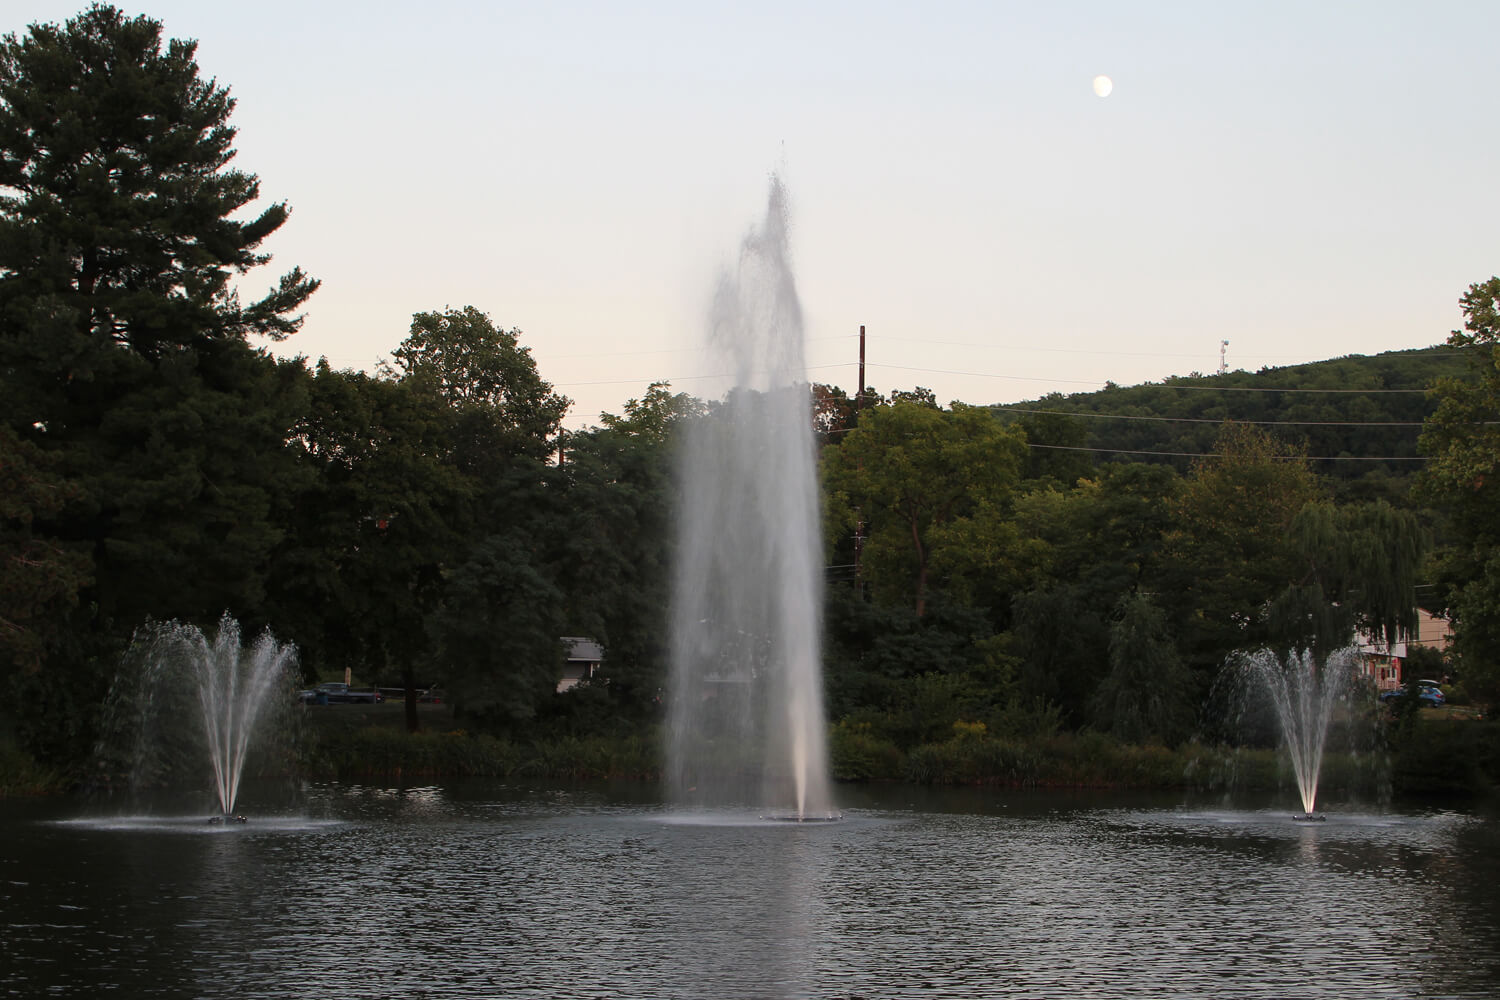 One of Otterbine's Giant Mystic Aerating Fountains